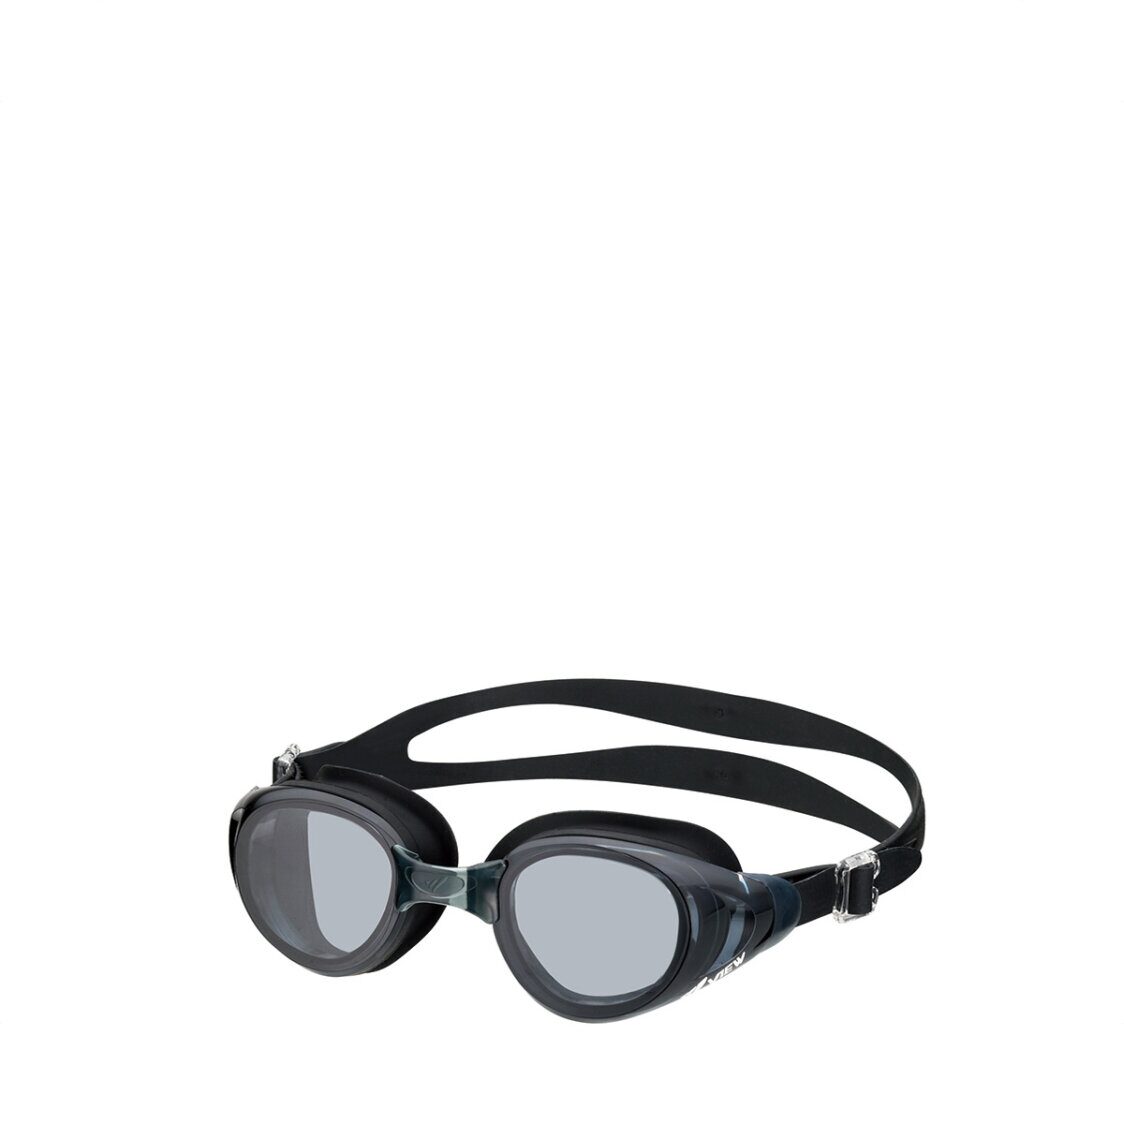 View Adult Goggle Black AAV800